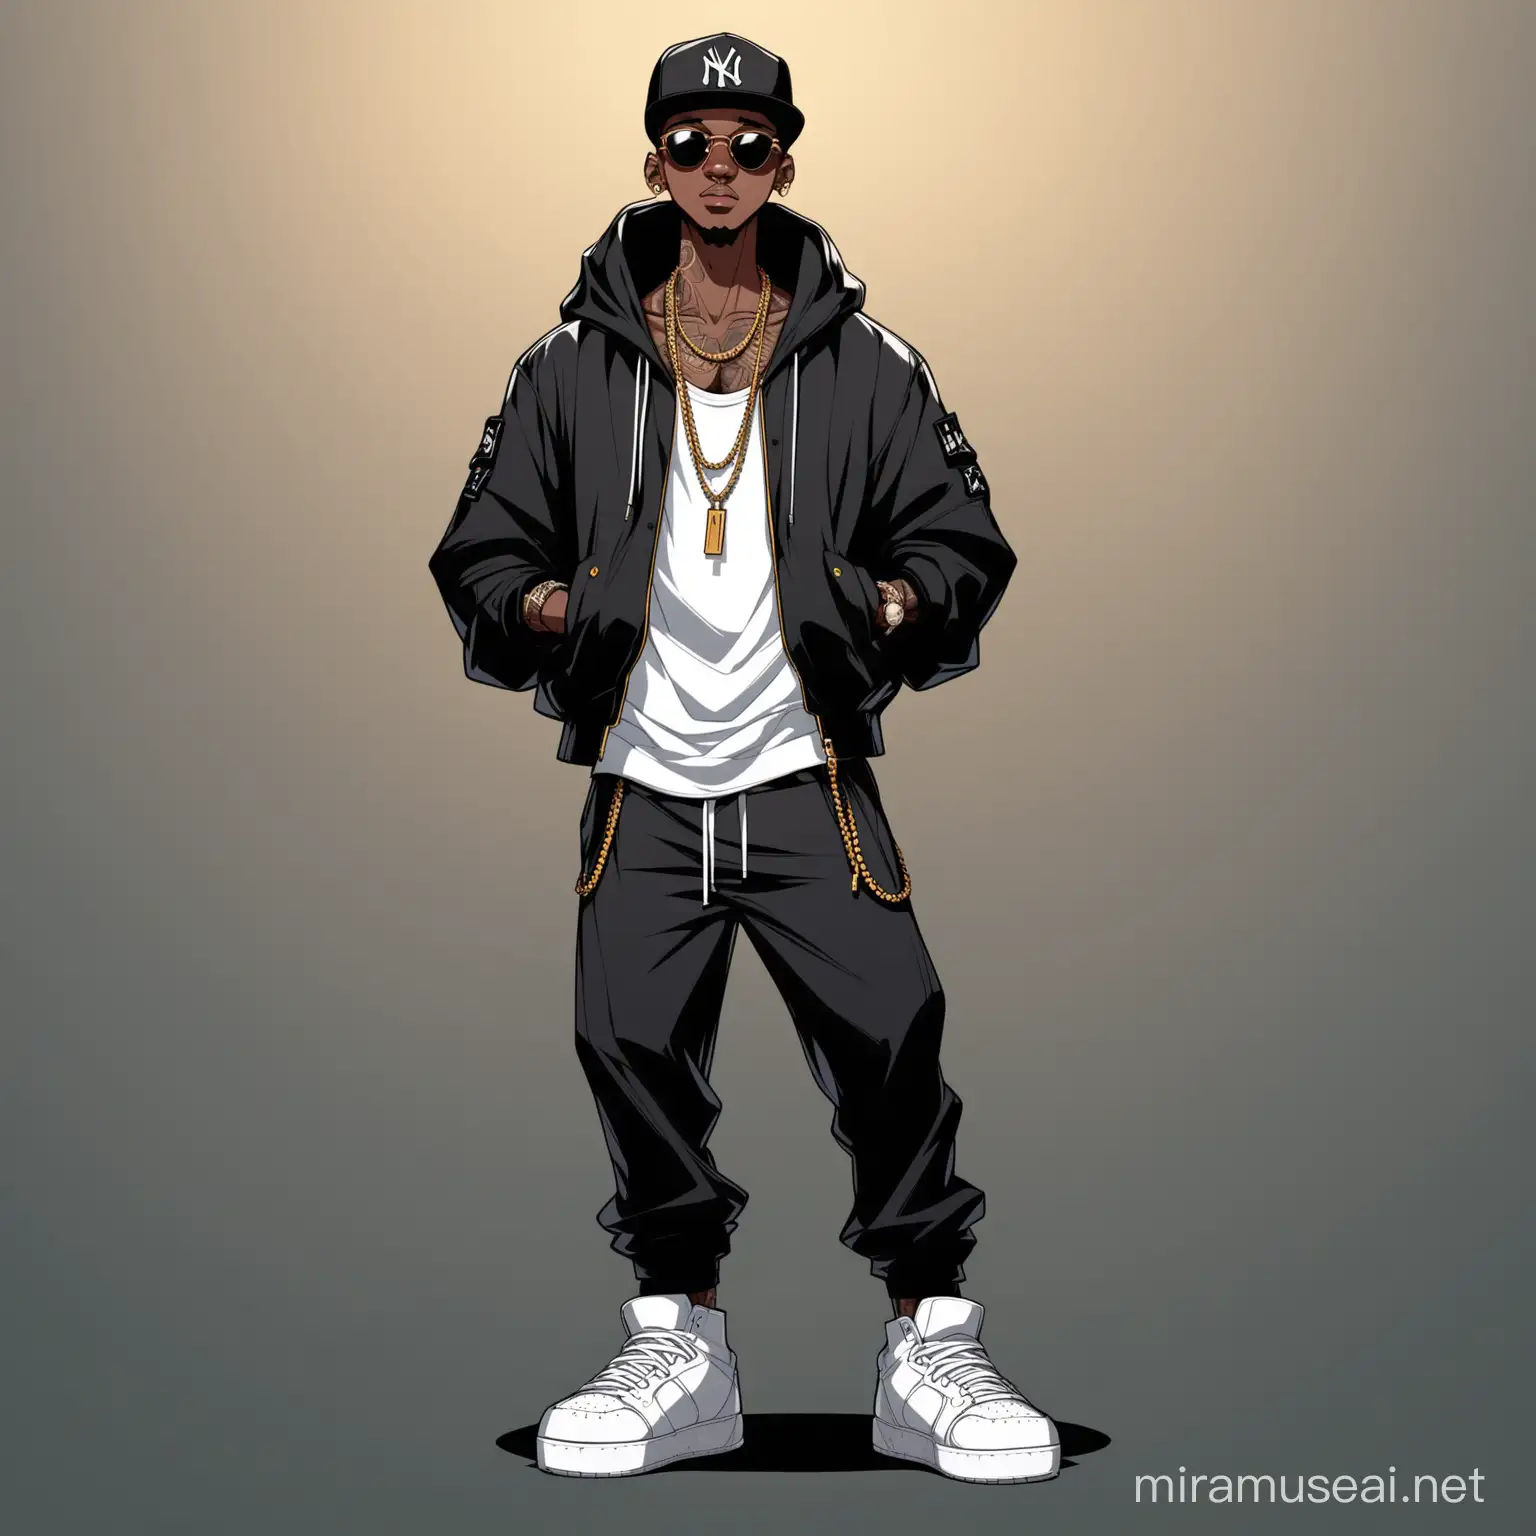 Animated Slim Black Rapper with LowCut Hair in Full Body Pose